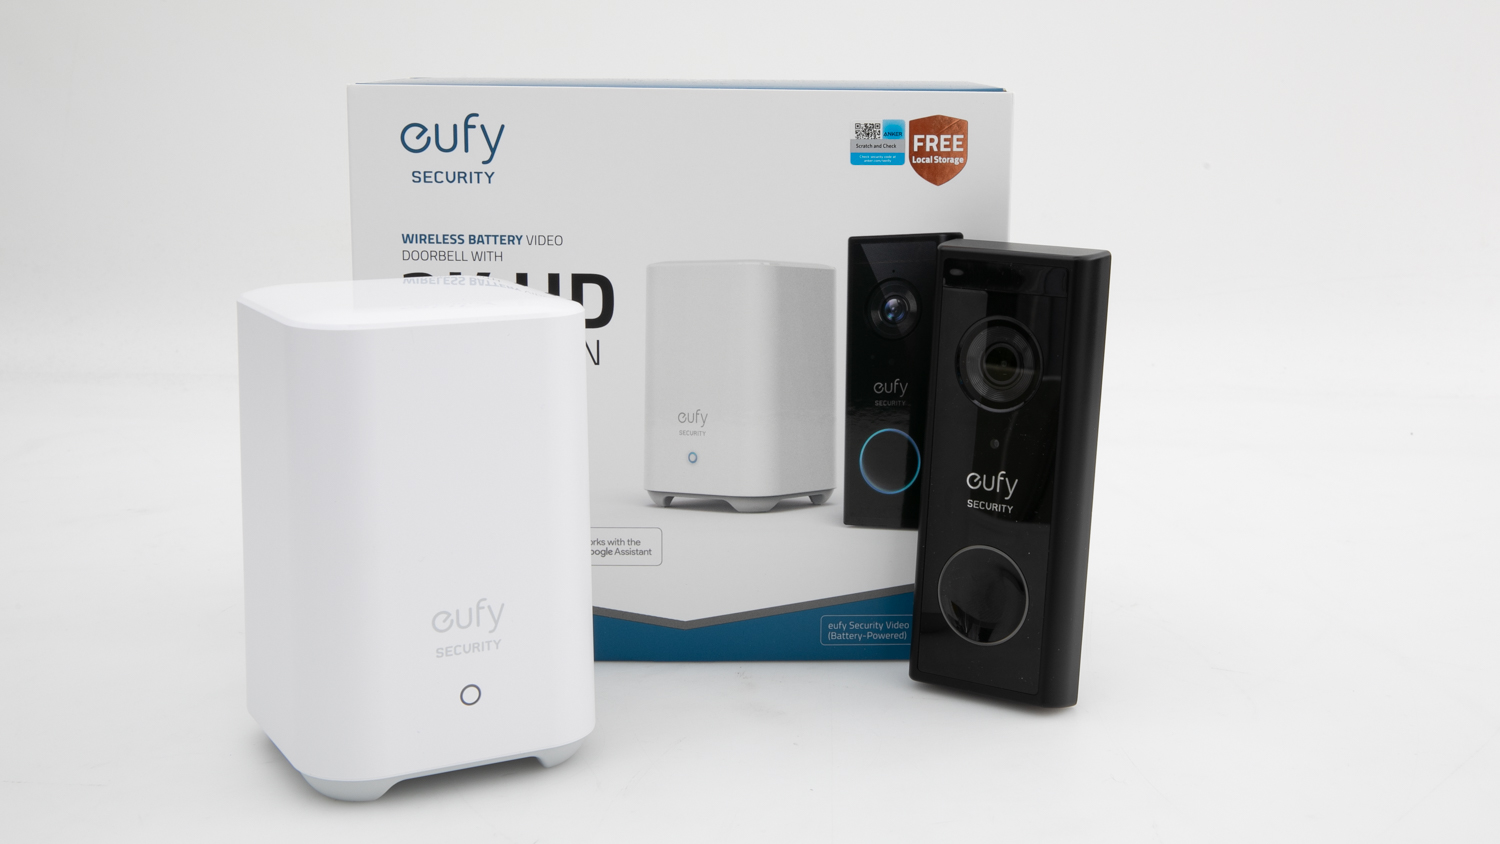 Eufy Wireless Battery Video Doorbell with 2K HD Resolution carousel image